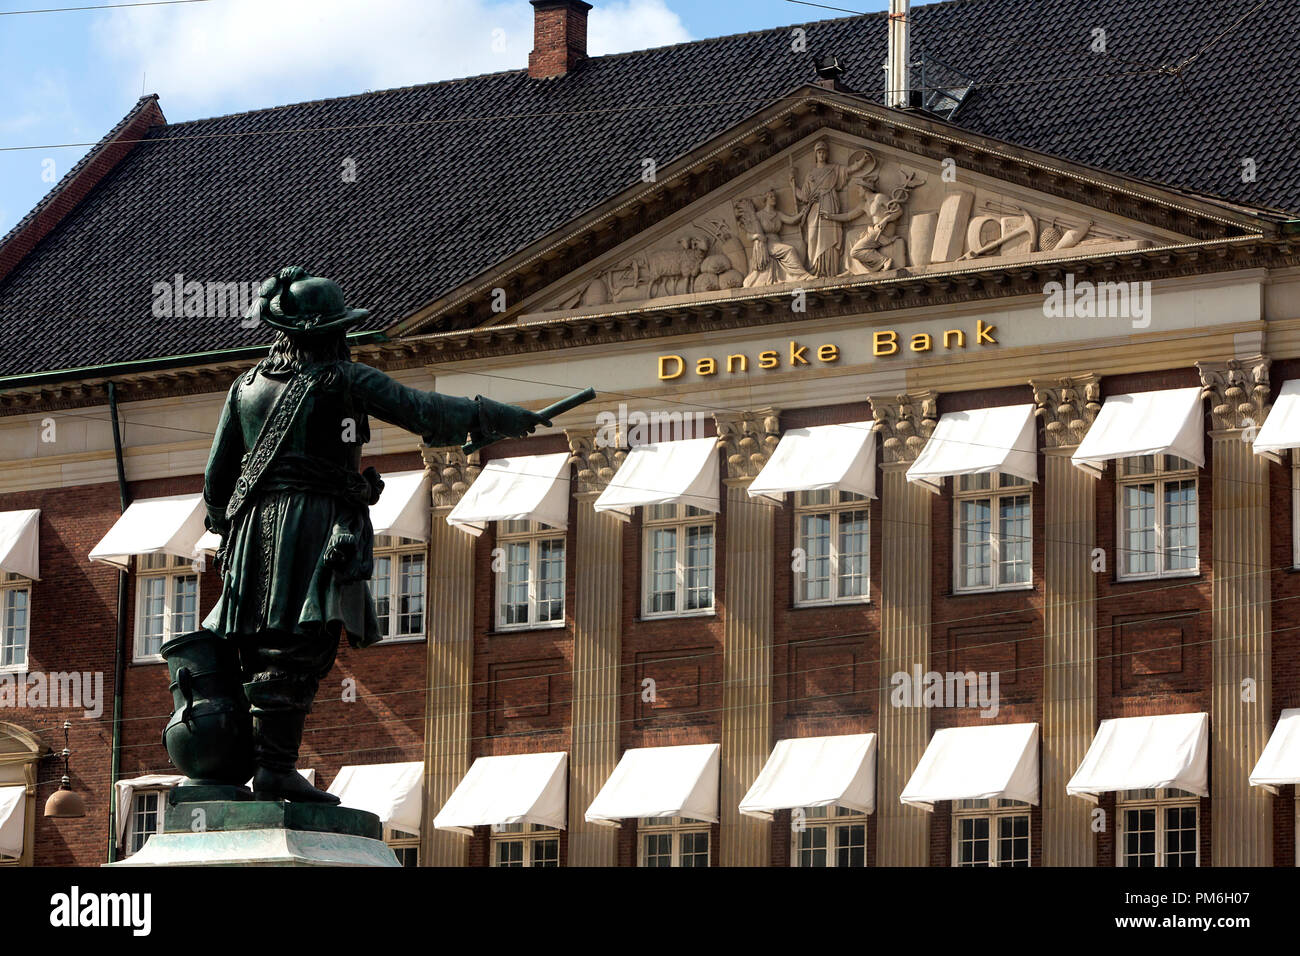 COPENHAGEN, DENMARK - SEPTEMBER 08, 2018:  Danish 17 century war hero Niels Juel points at Danske Bank’s headquarter at Holmen’s Kanal in Copenhagen. Danske Bank is the largest bank in Denmark. According to a Wall Street Journal article on September 07, 2018, the bank is currently investigating to which extend it has been used to launder money from companies related to Russia and is examining transactions to a value of $150 billion that flowed through its small branch in Estonia. (Photo by Ole Jensen/Alamy) Stock Photo